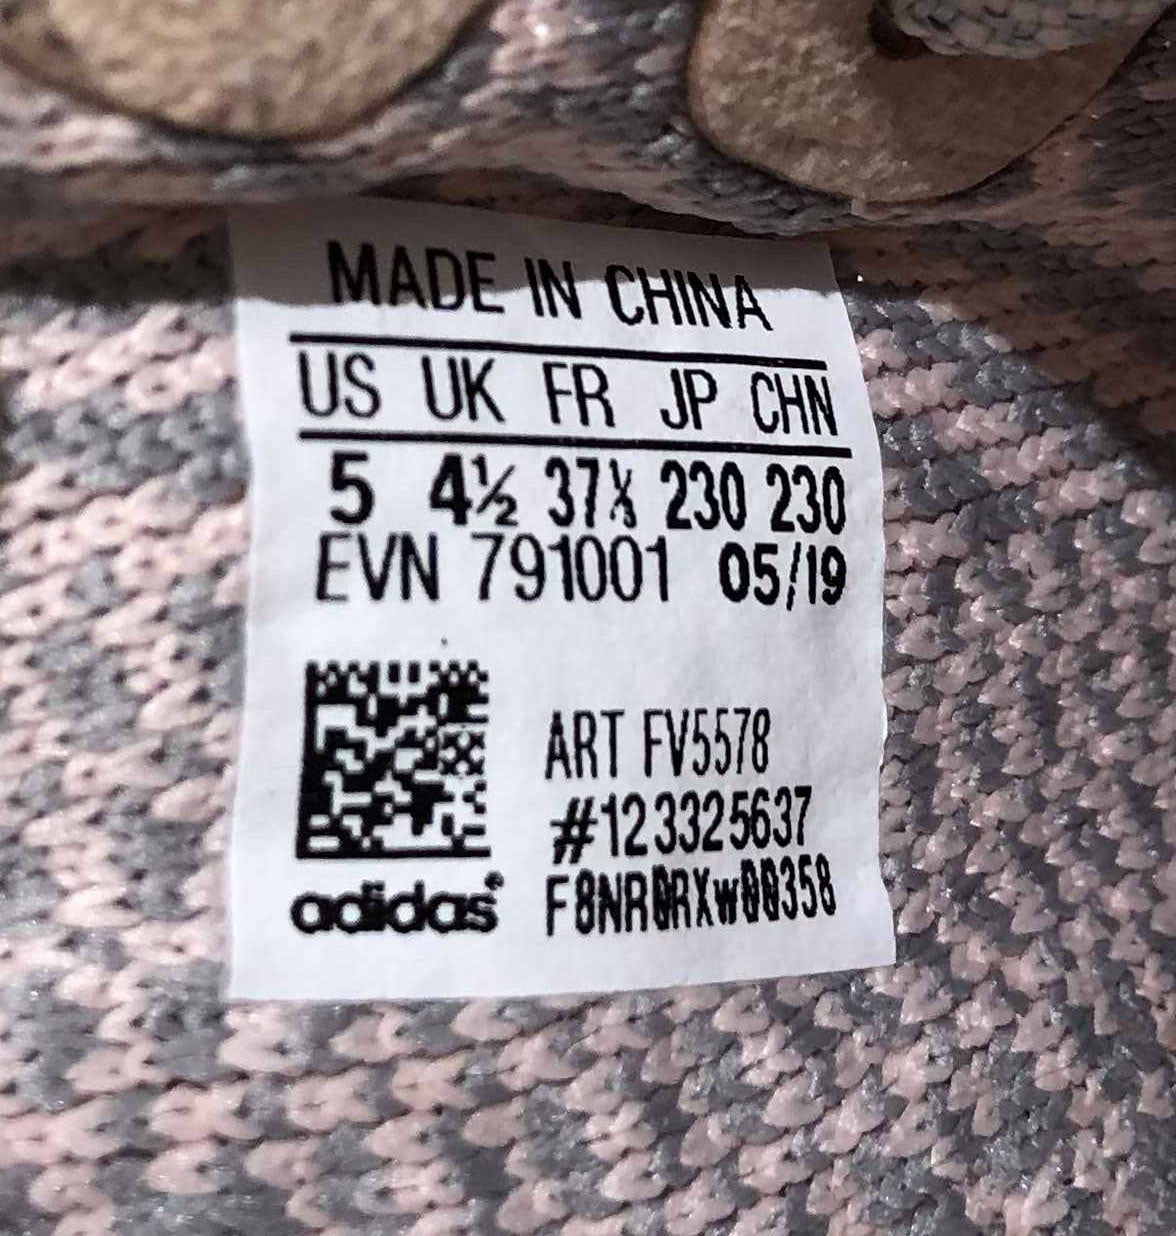 How to legit check yeezy 350 Boost Synth